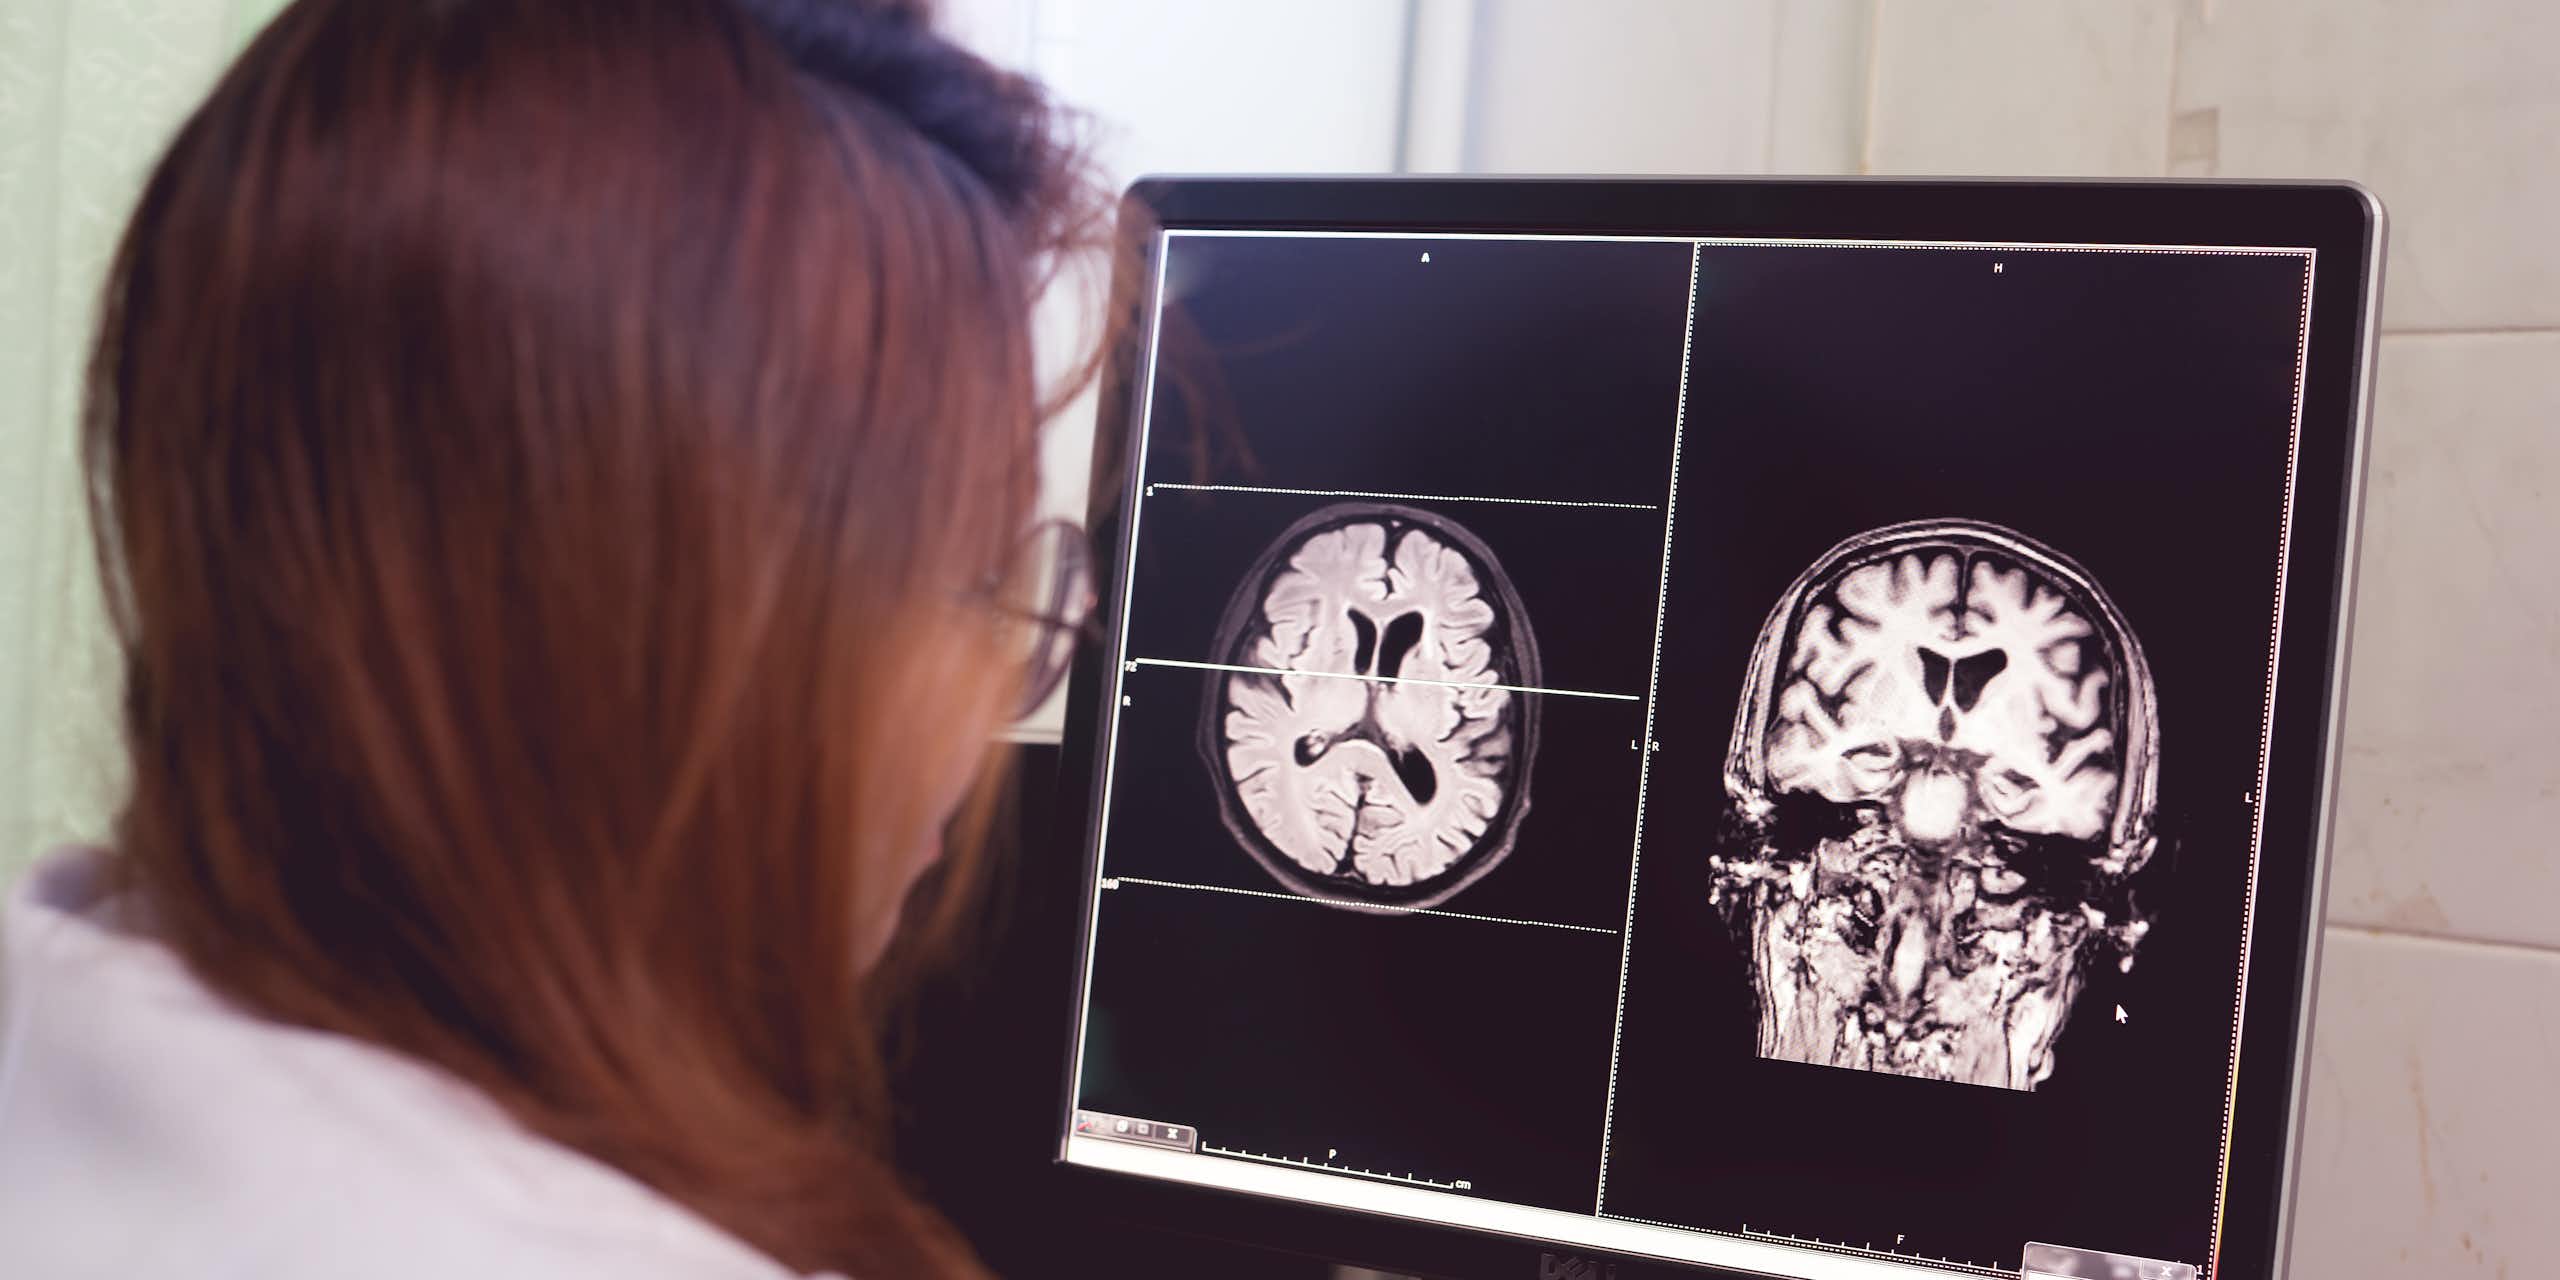 A female doctor wearing a white lab coat looks at brain scans on a computer screen.